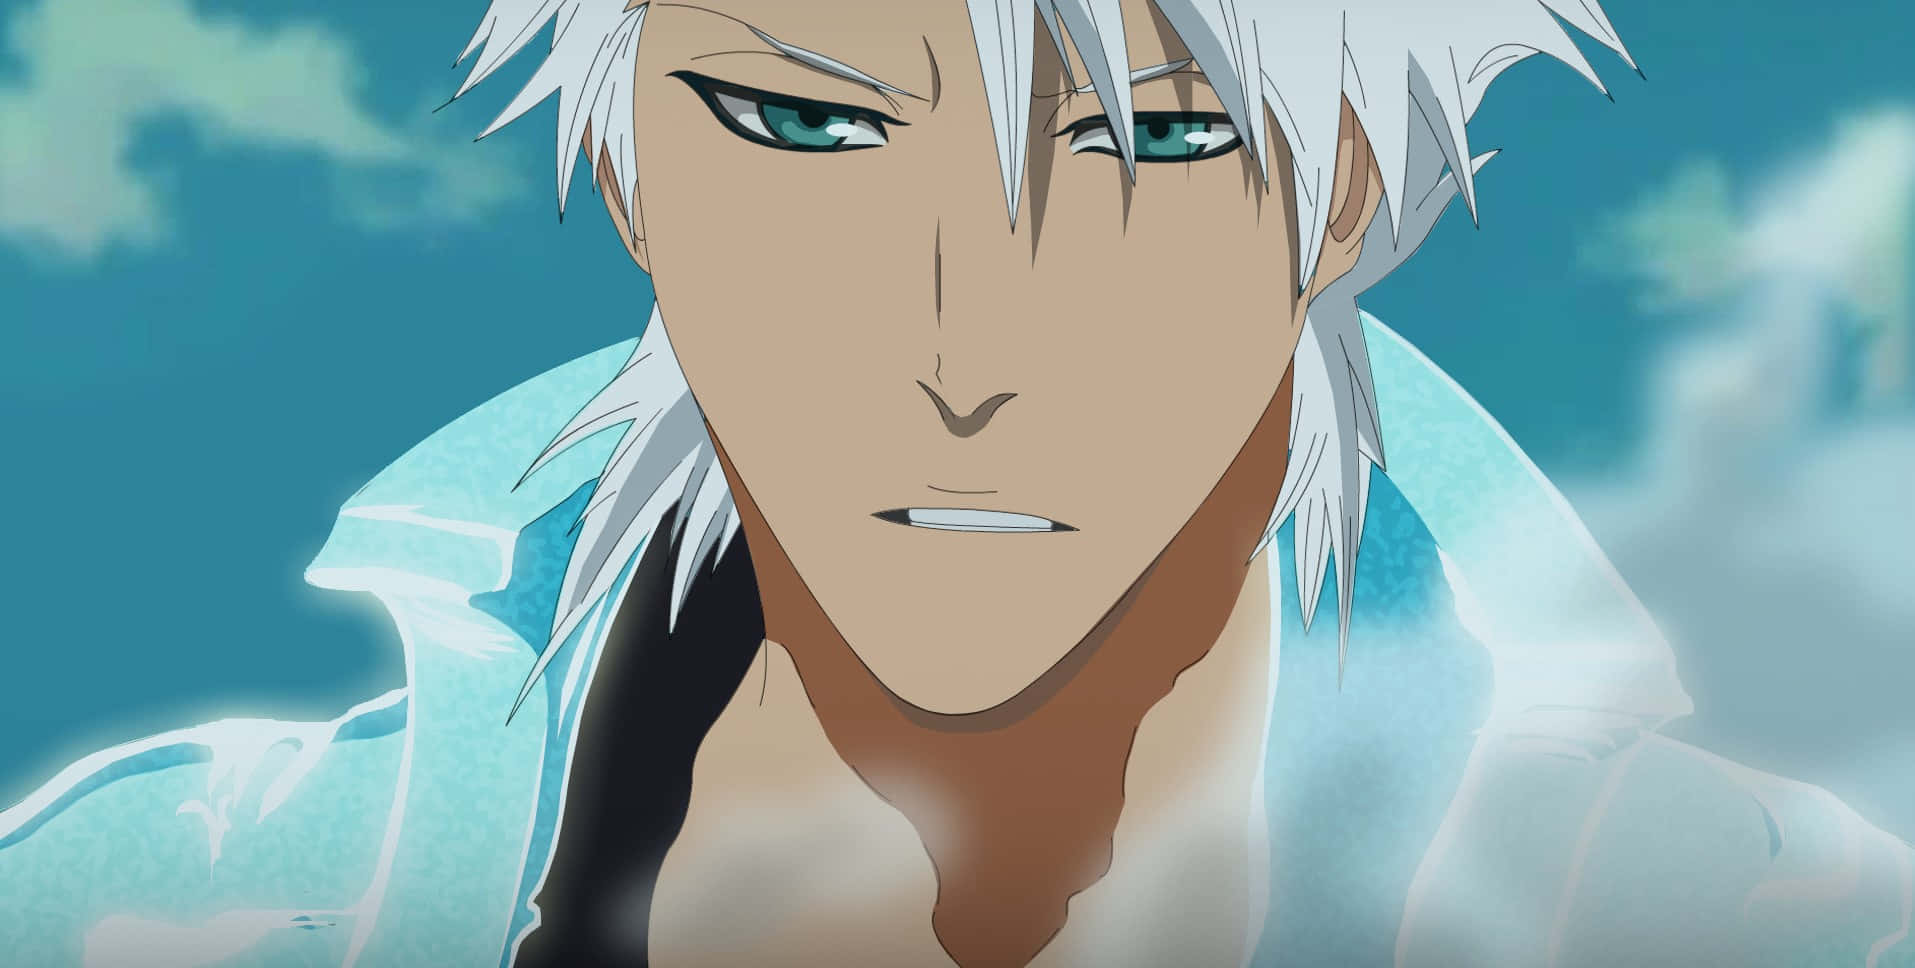 Toshiro Hitsugaya, The 10th Division Captain Of Gotei 13 In The Anime Series, Bleach.